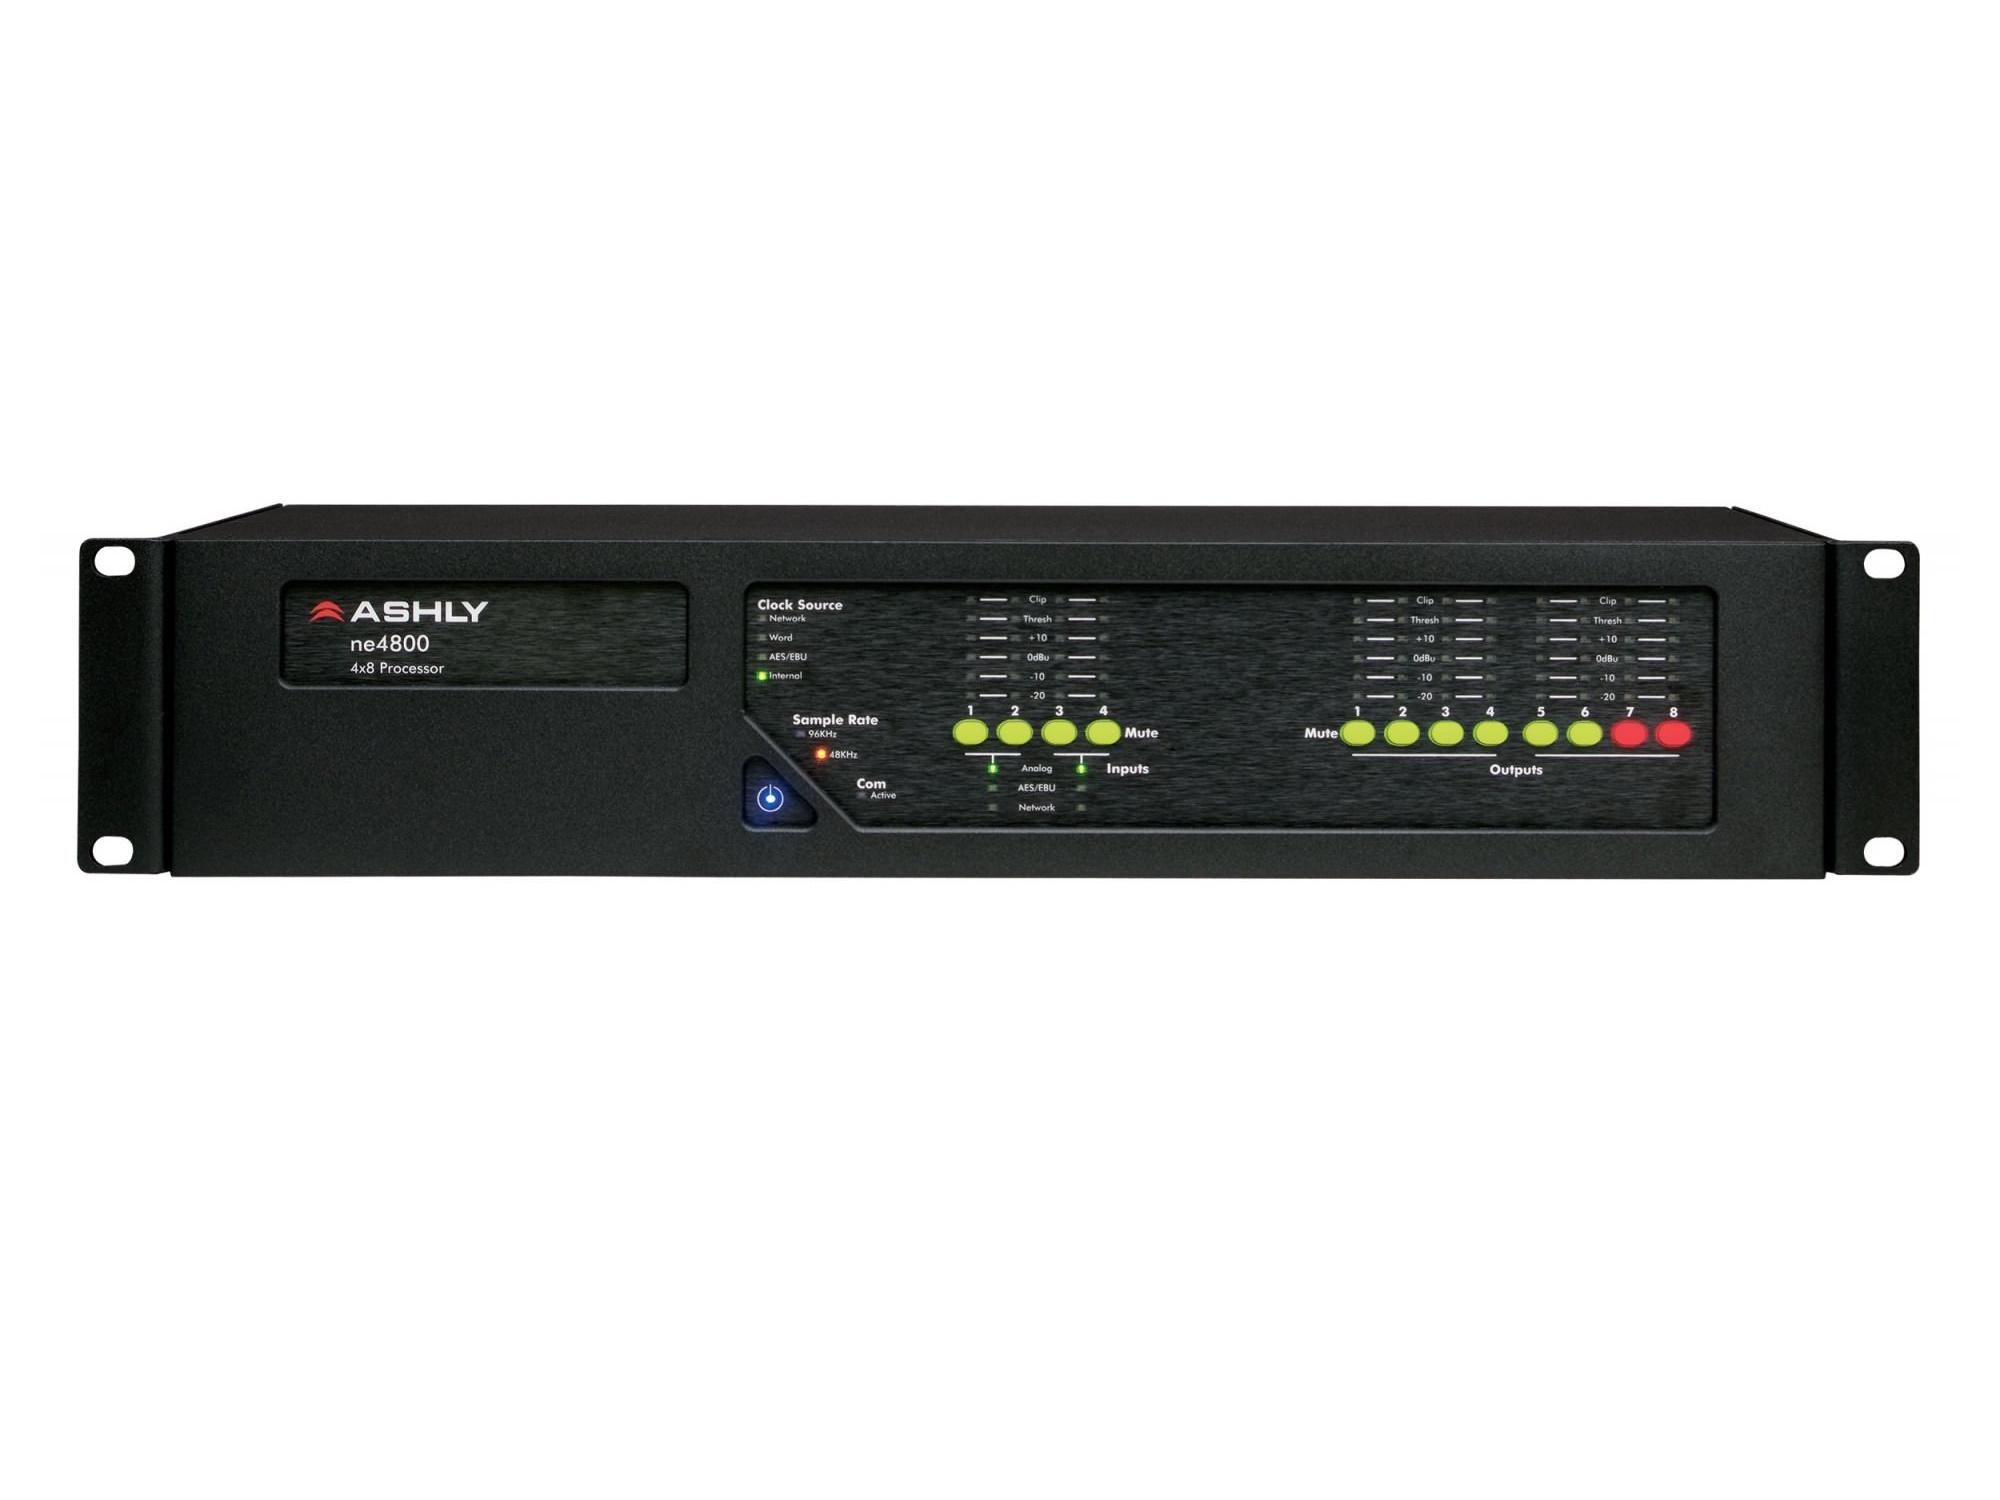 ne4800sd ne4800 Network Protea System Processor plus 8-Chan AES3 Outputs and Dante Network Card by Ashly